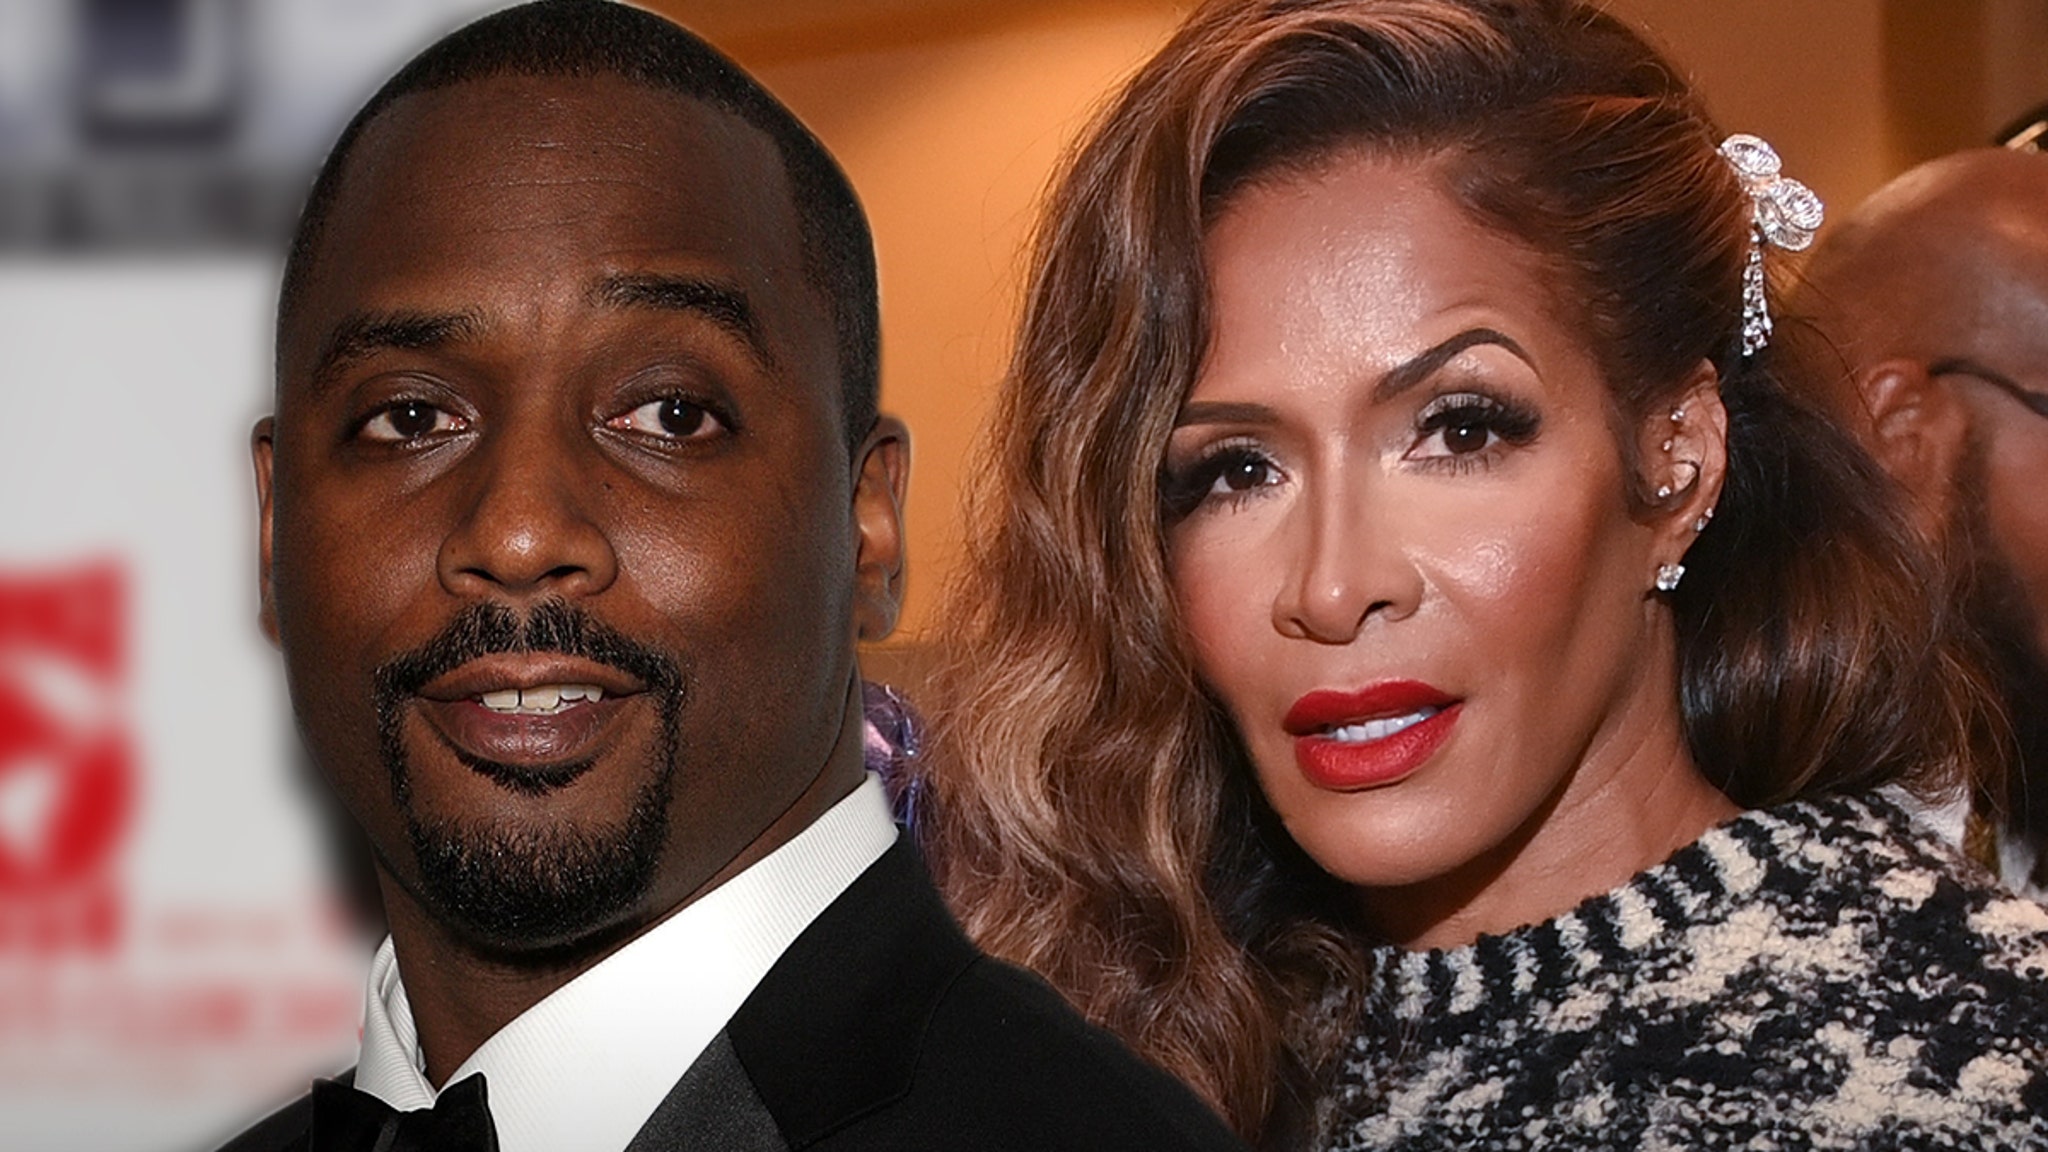 Picture - 'RHOA' Star Sheree Whitfield's BF Pissed at Bravo, Wants Footage Scrubbed